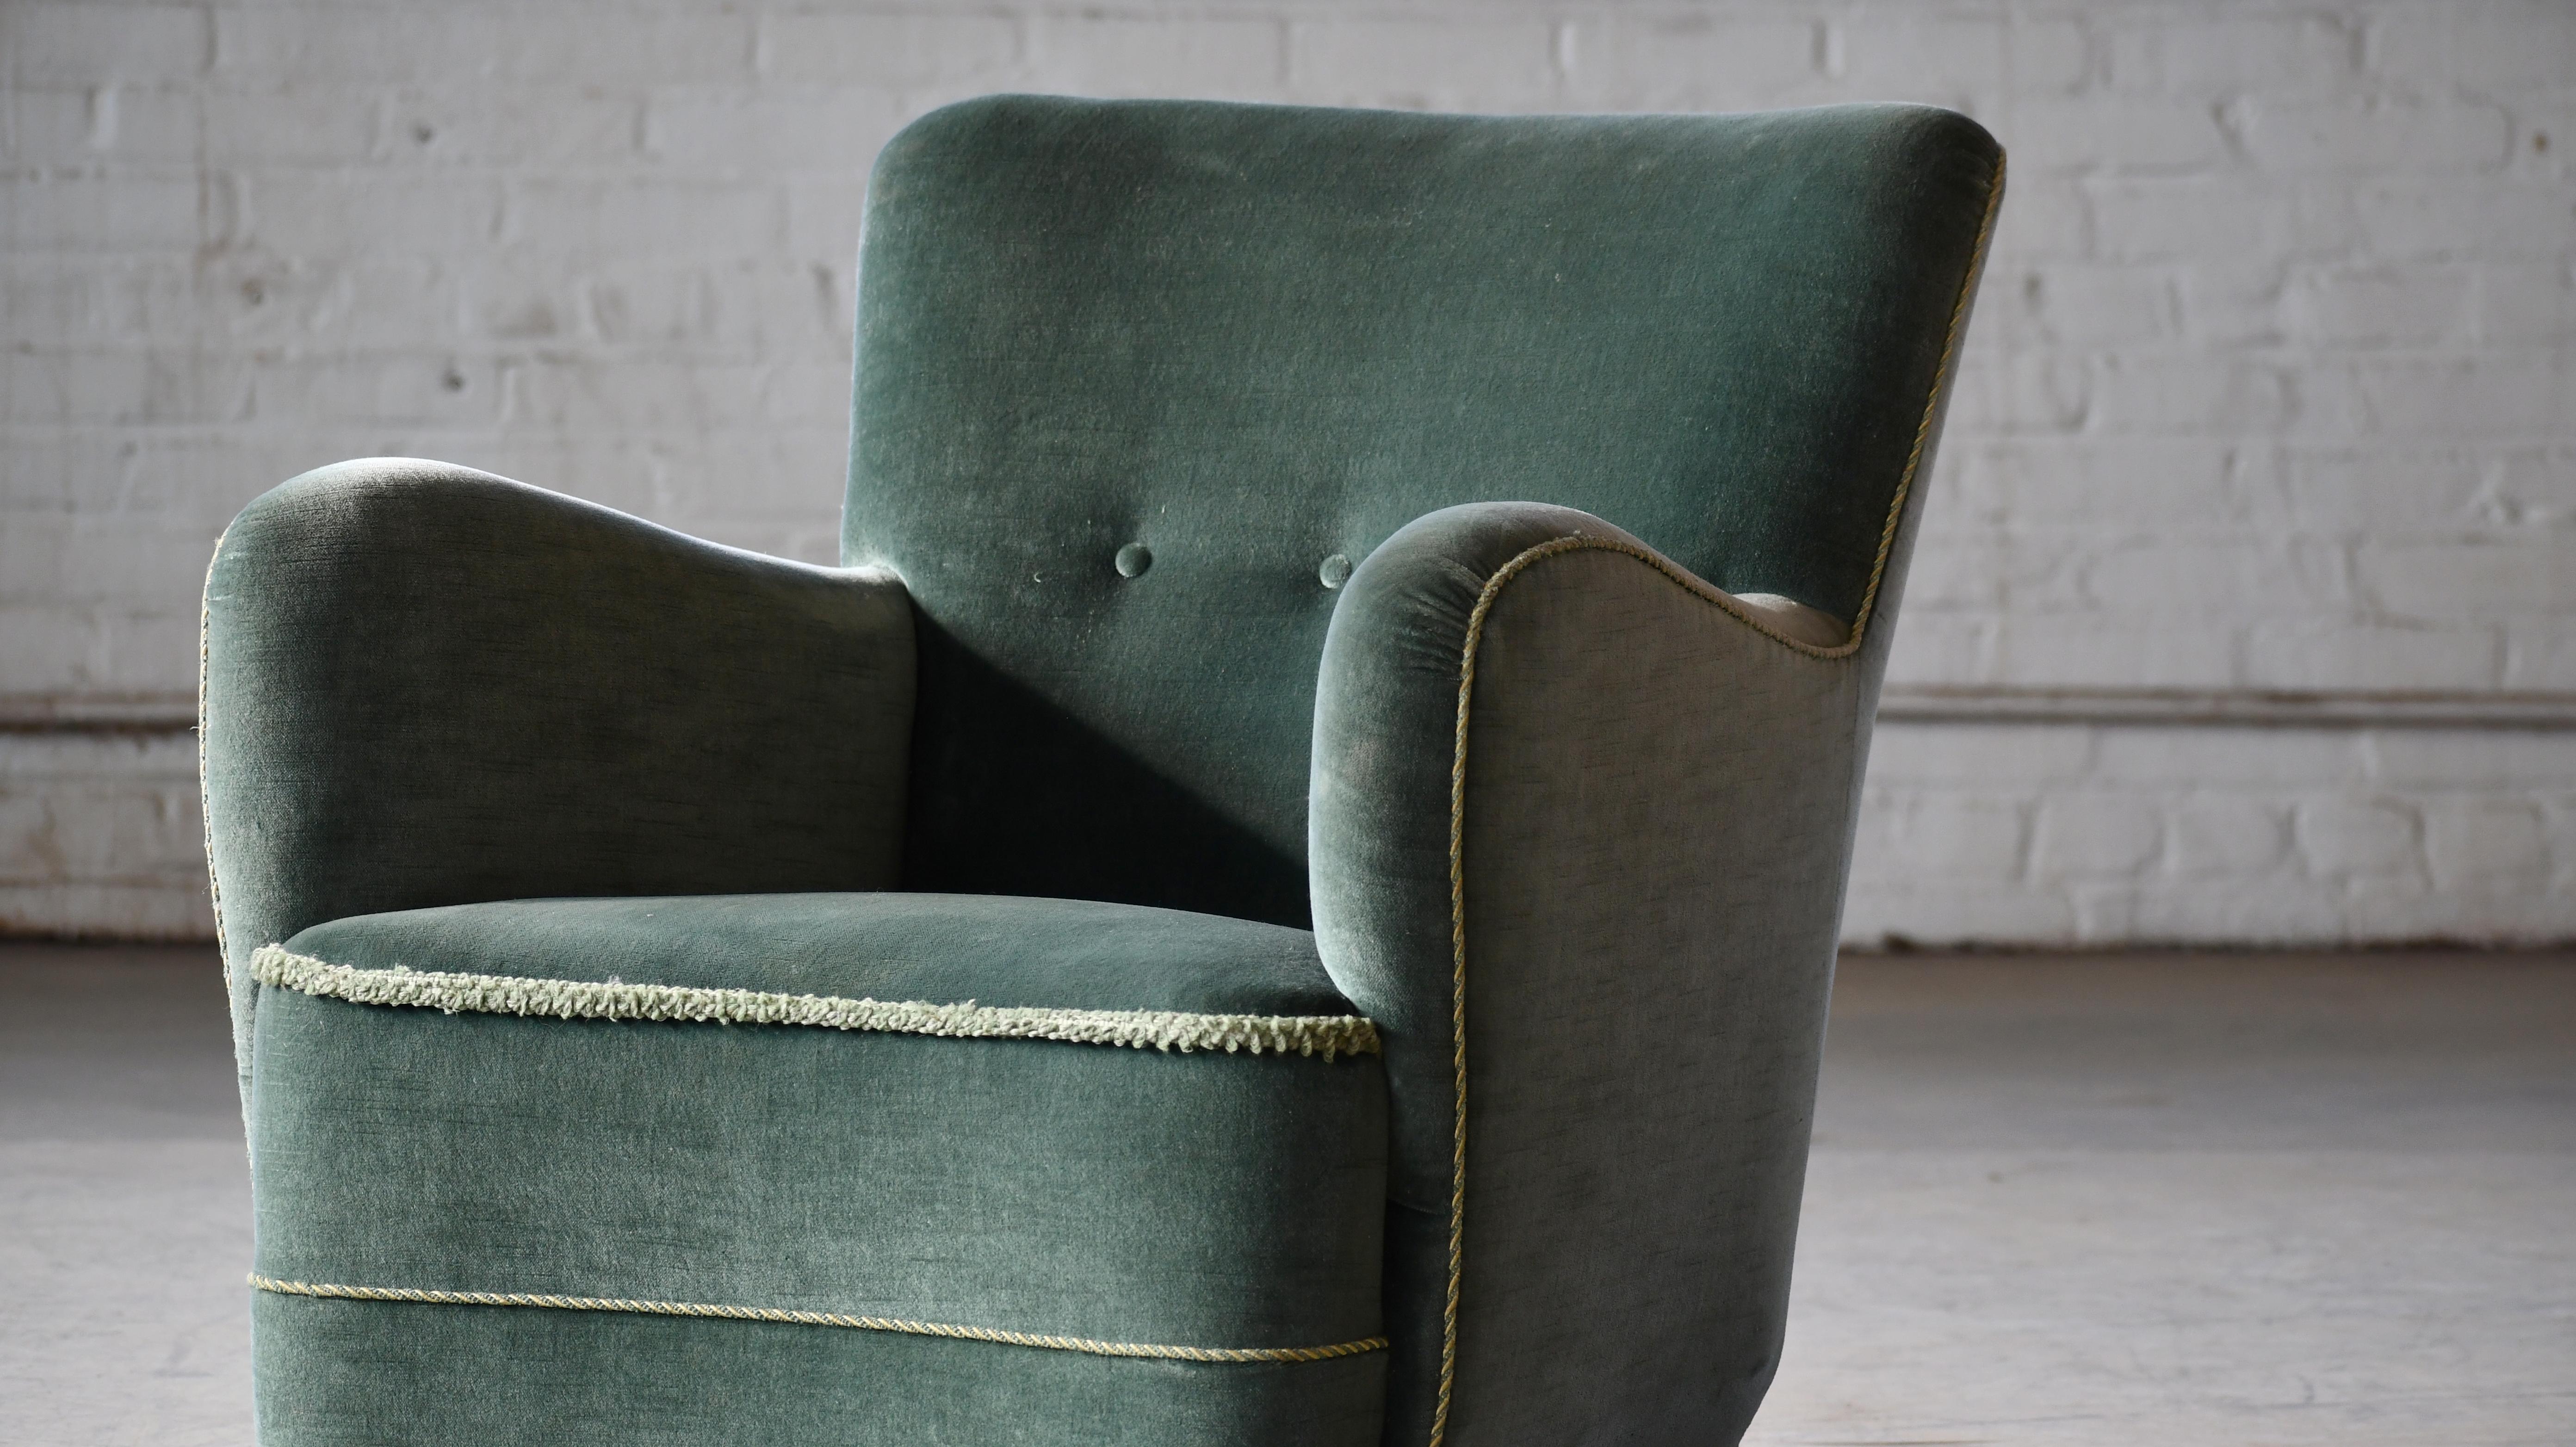 Mid-Century Modern Danish Art Deco or Early Midcentury Lounge Chair in Green Mohair 1930-40s For Sale